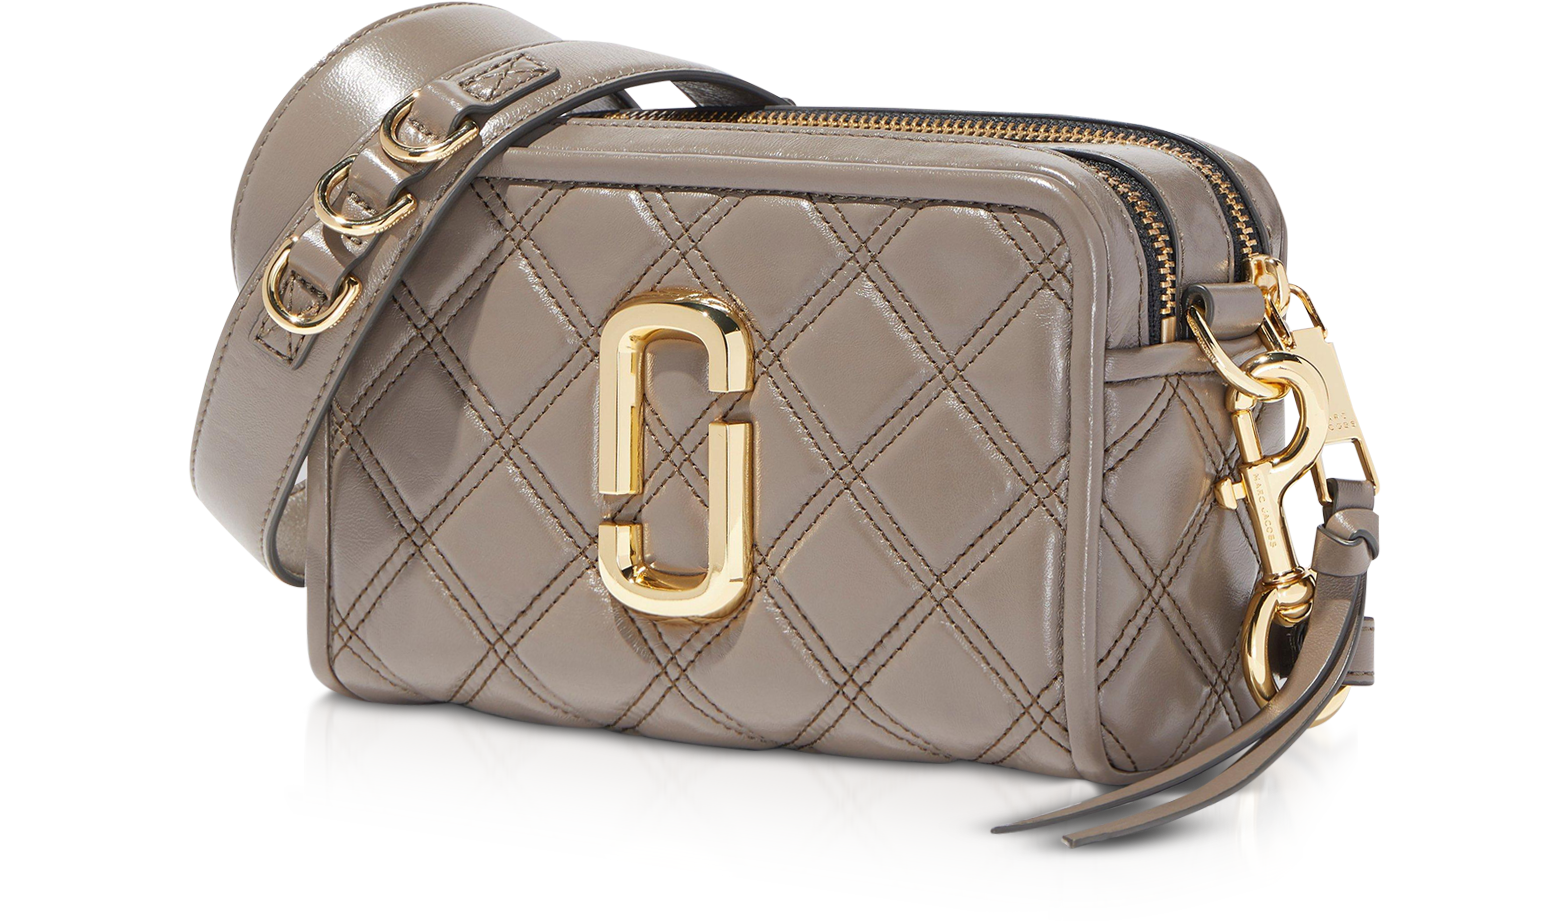 The Quilted Softshot 21 Lambskin Crossbody Bag